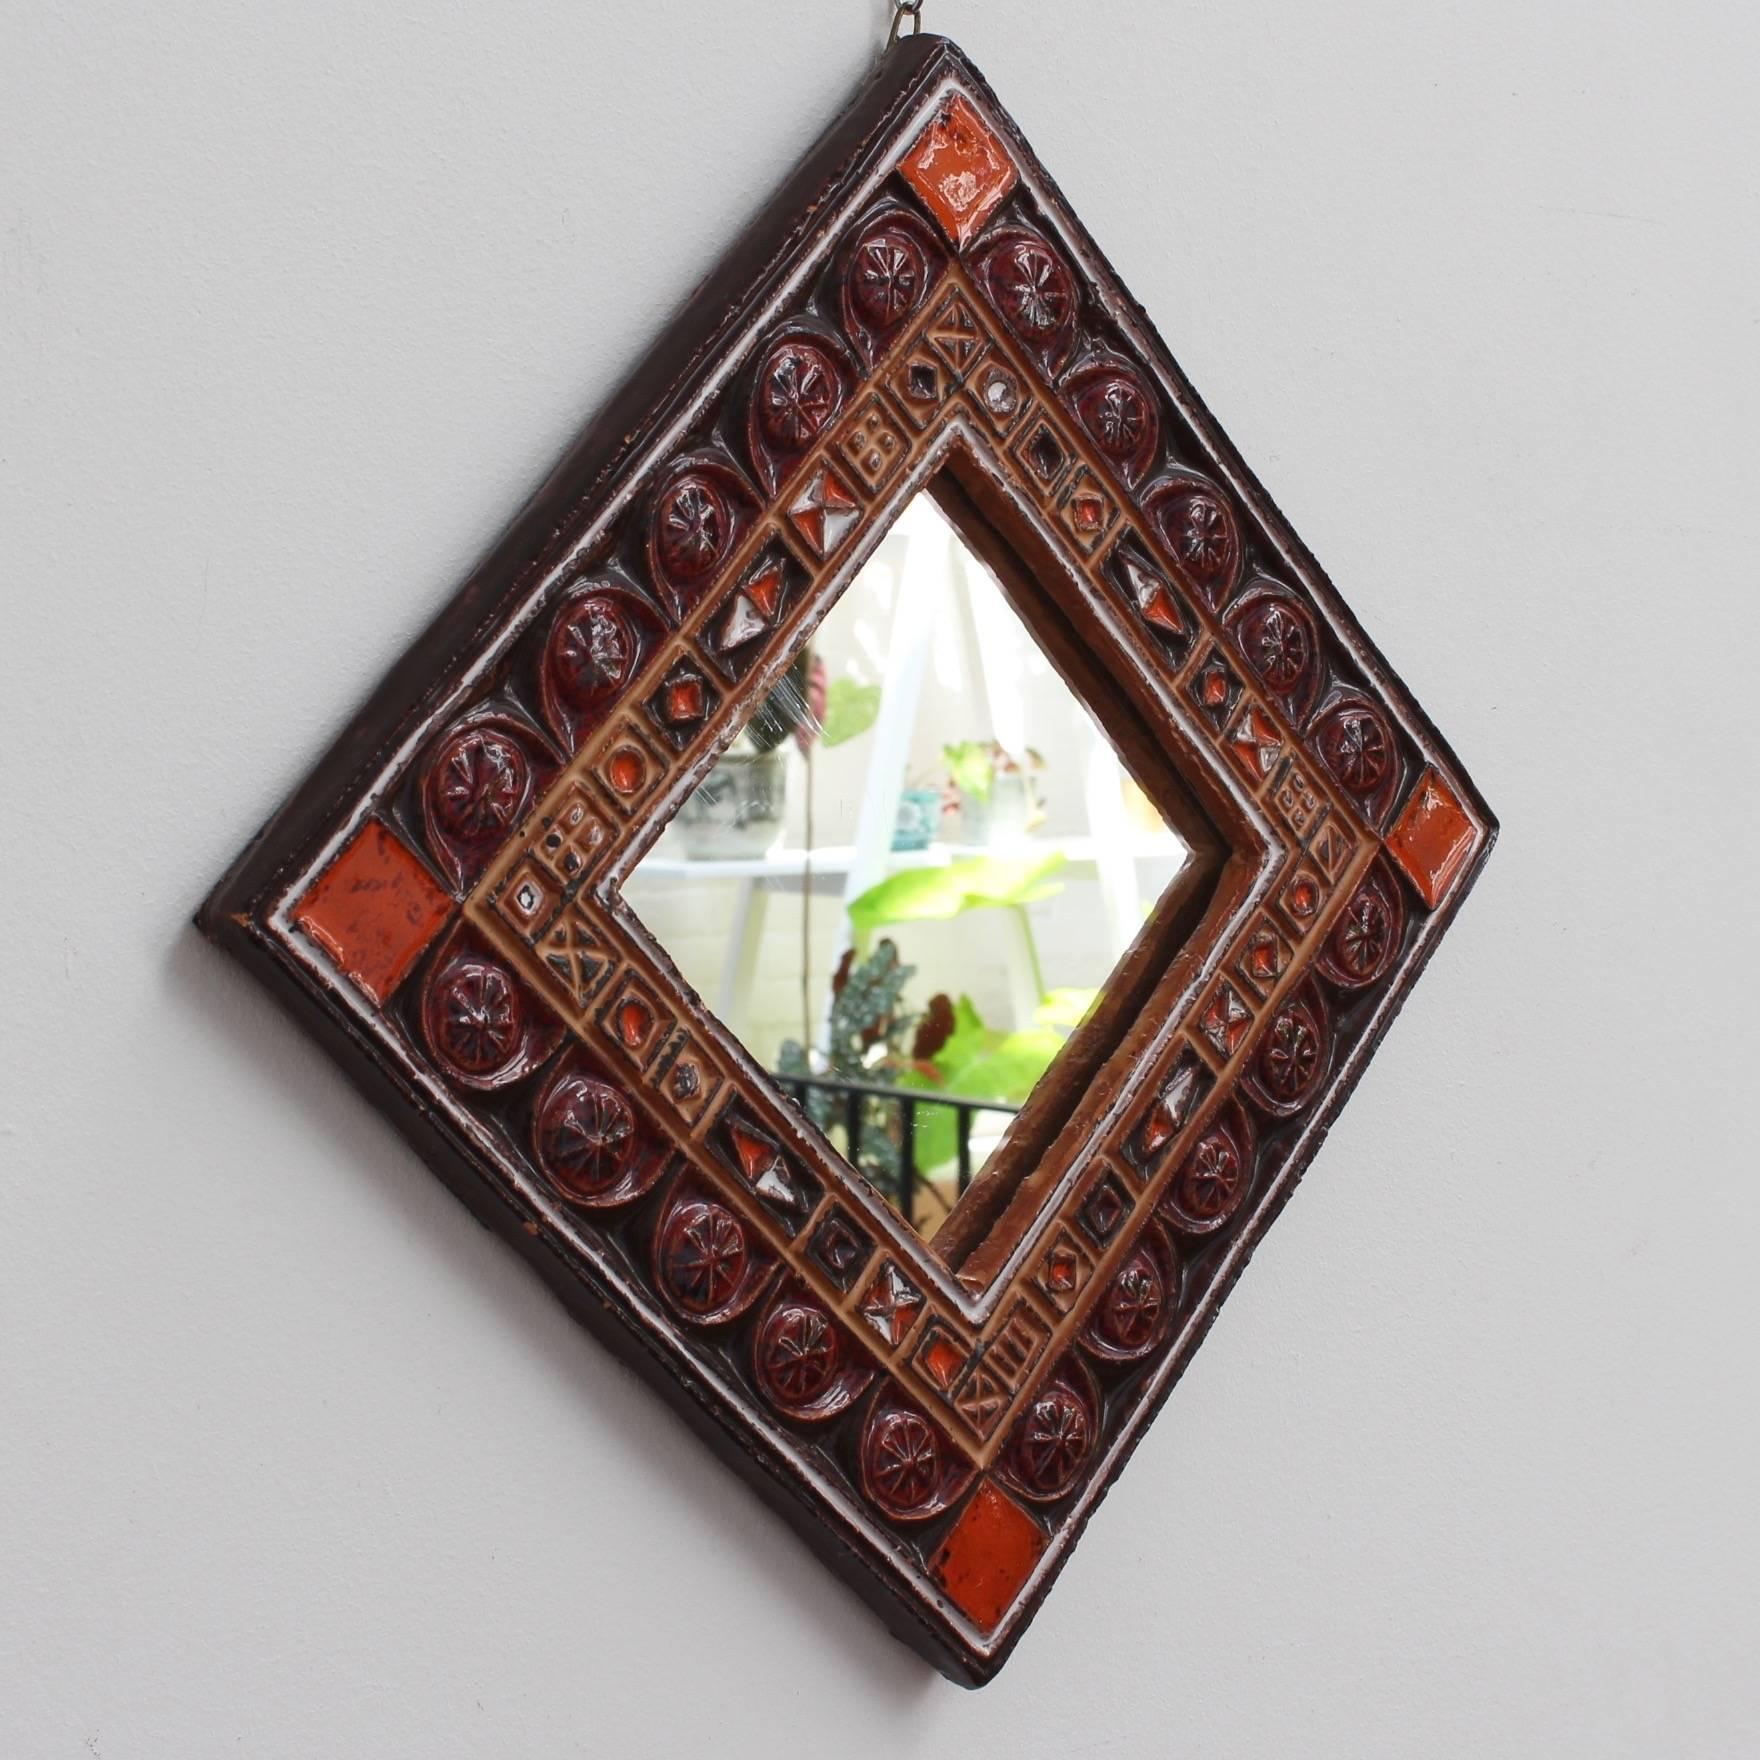 Midcentury French ceramic decorative mirror attributed to Atelier Les Cyclades, Anduze, France, circa 1960s-1970s. A ceramic frame with inset enamel decorative shapes form this colorful square mirror. The glass centre piece is enclosed by